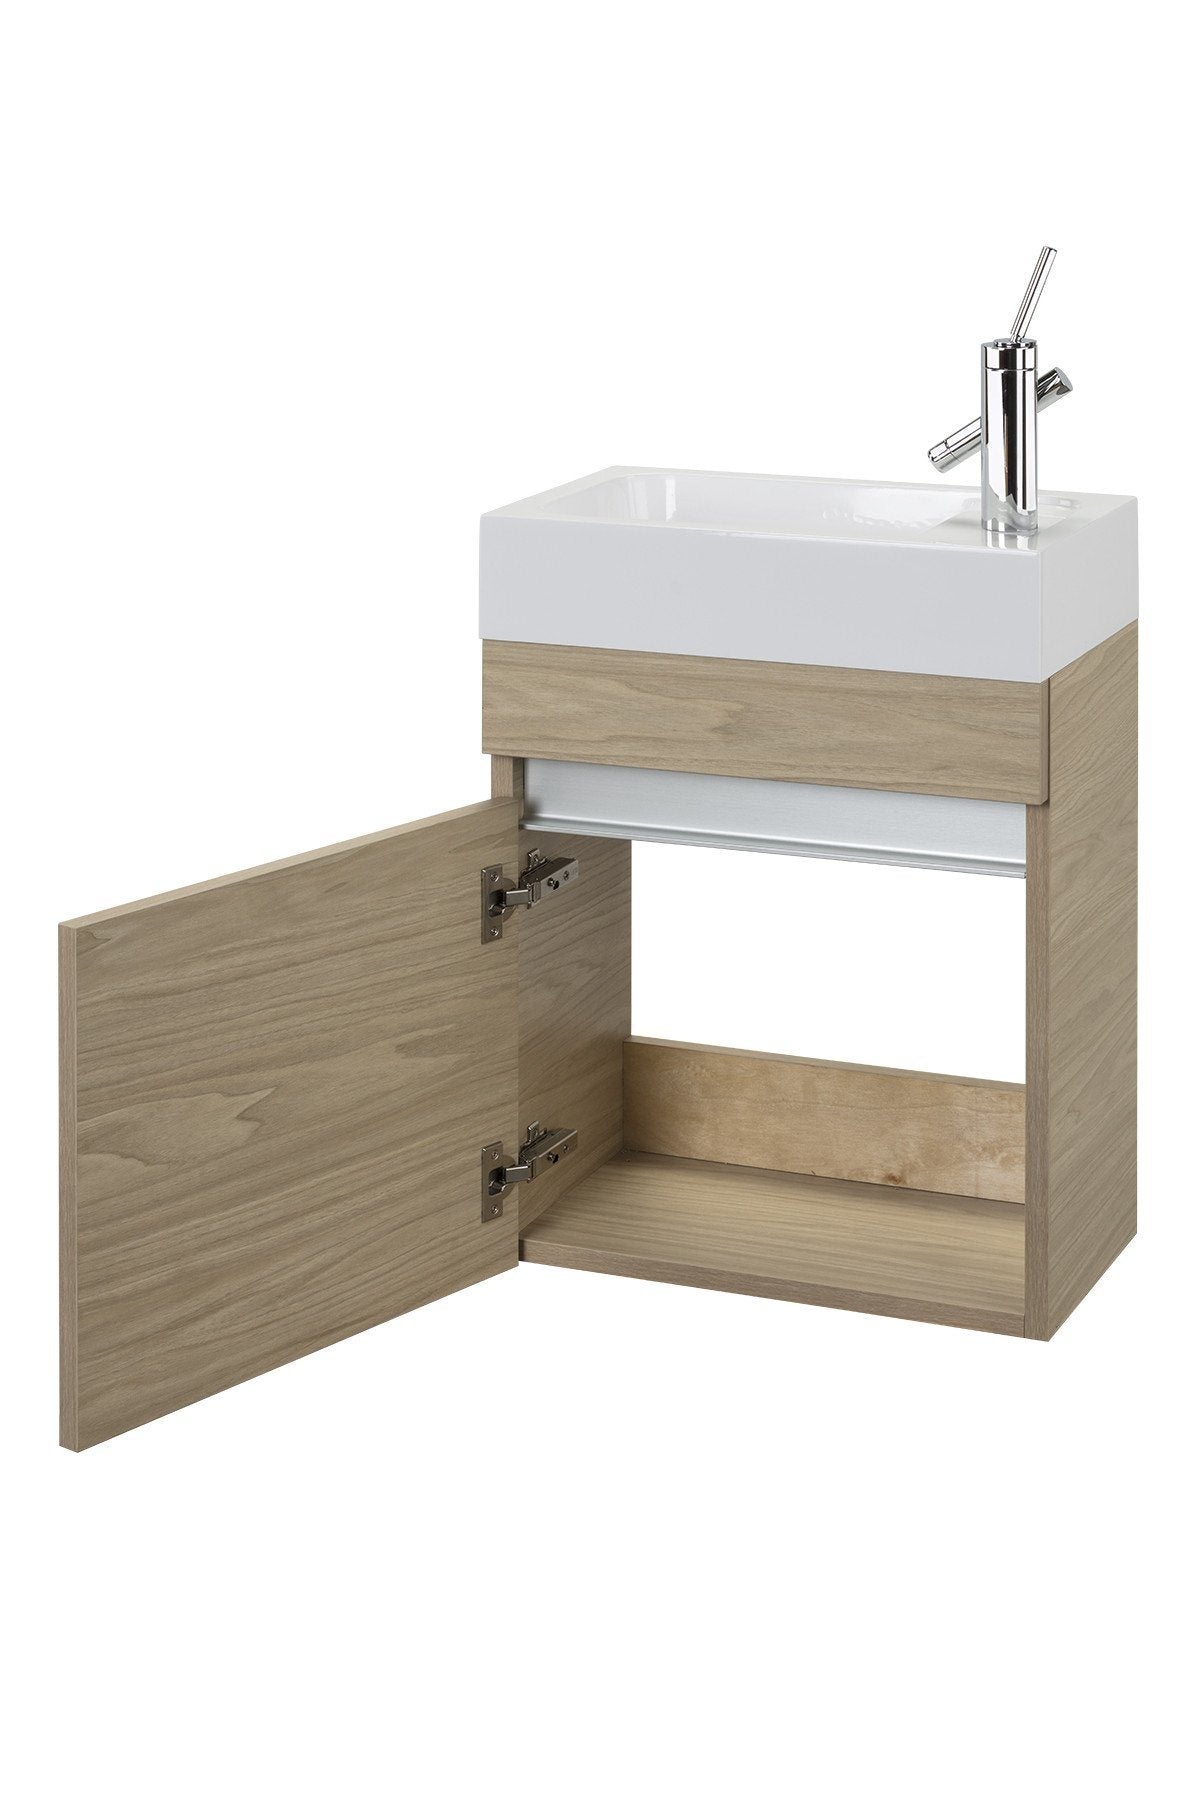 CASTING AT FIRST LIGHT 18" Space Saver Light Wood Vanity by Cutler Vanity Cutler Kitchen & Bath 